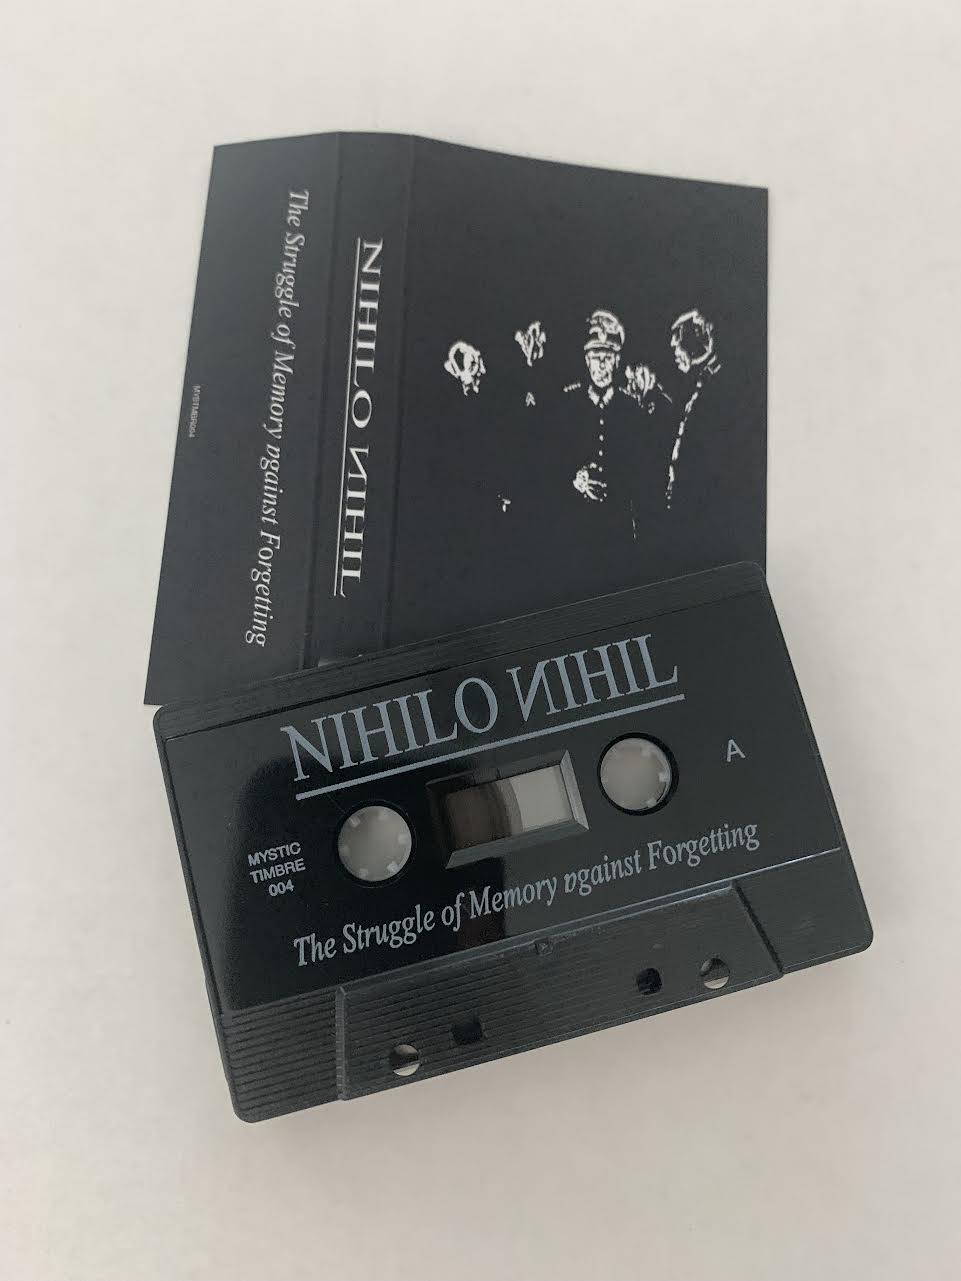 Nihilo Nihil - Struggle of Memory against Forgetting, The [Sound Collage] (Mystic Timbre - Tape - 4/20/19)